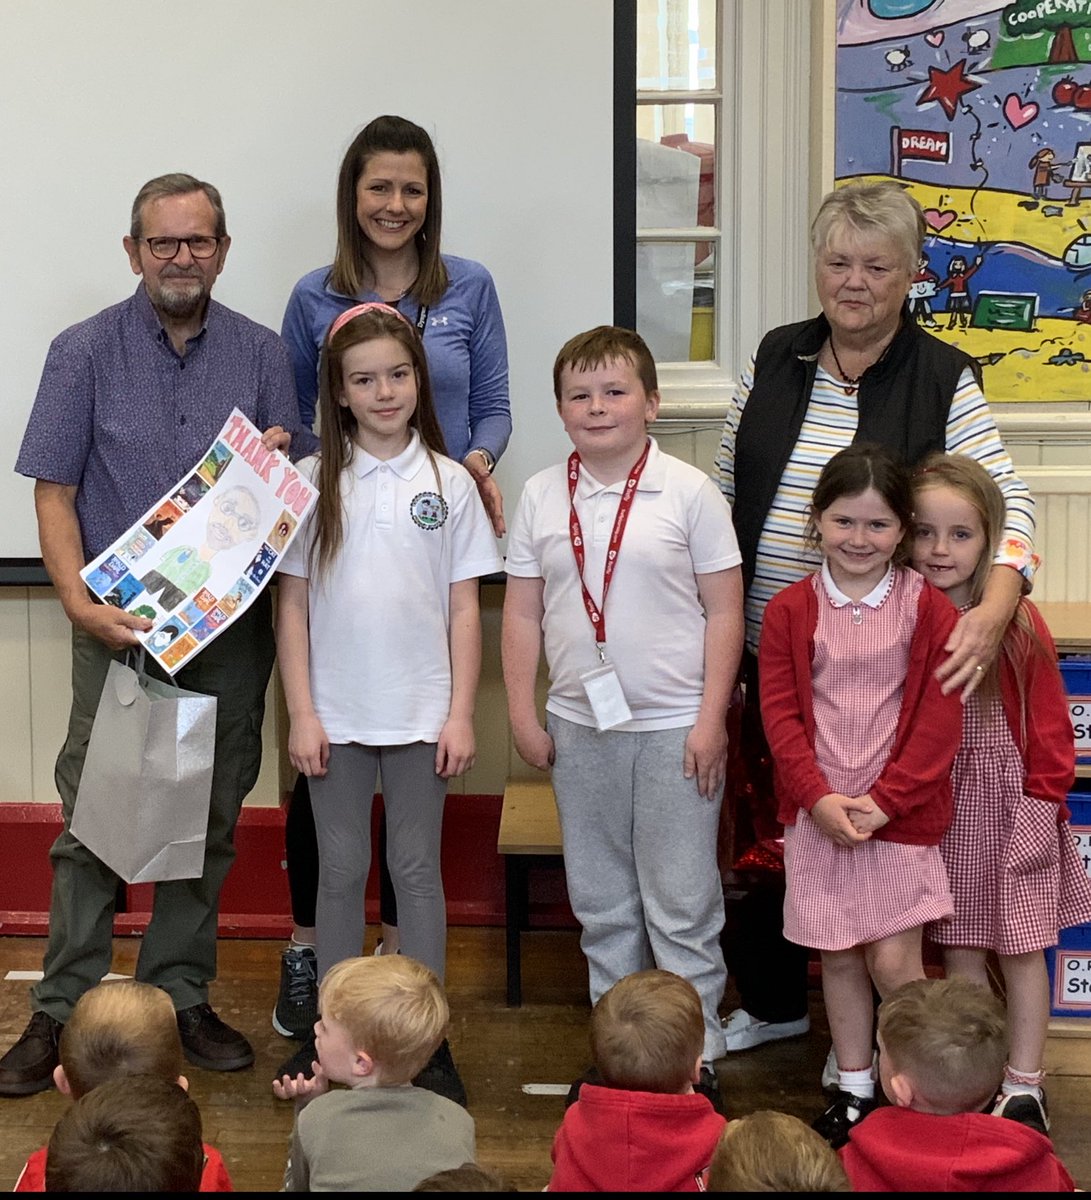 A special assembly to say a BIG thank you to our amazing volunteers Derrick, Val and John. Supporting our pupils with everything from reading, maths and gardening. You are so valued and appreciated ❤️ Thank you! #communityfocusedschools #Community